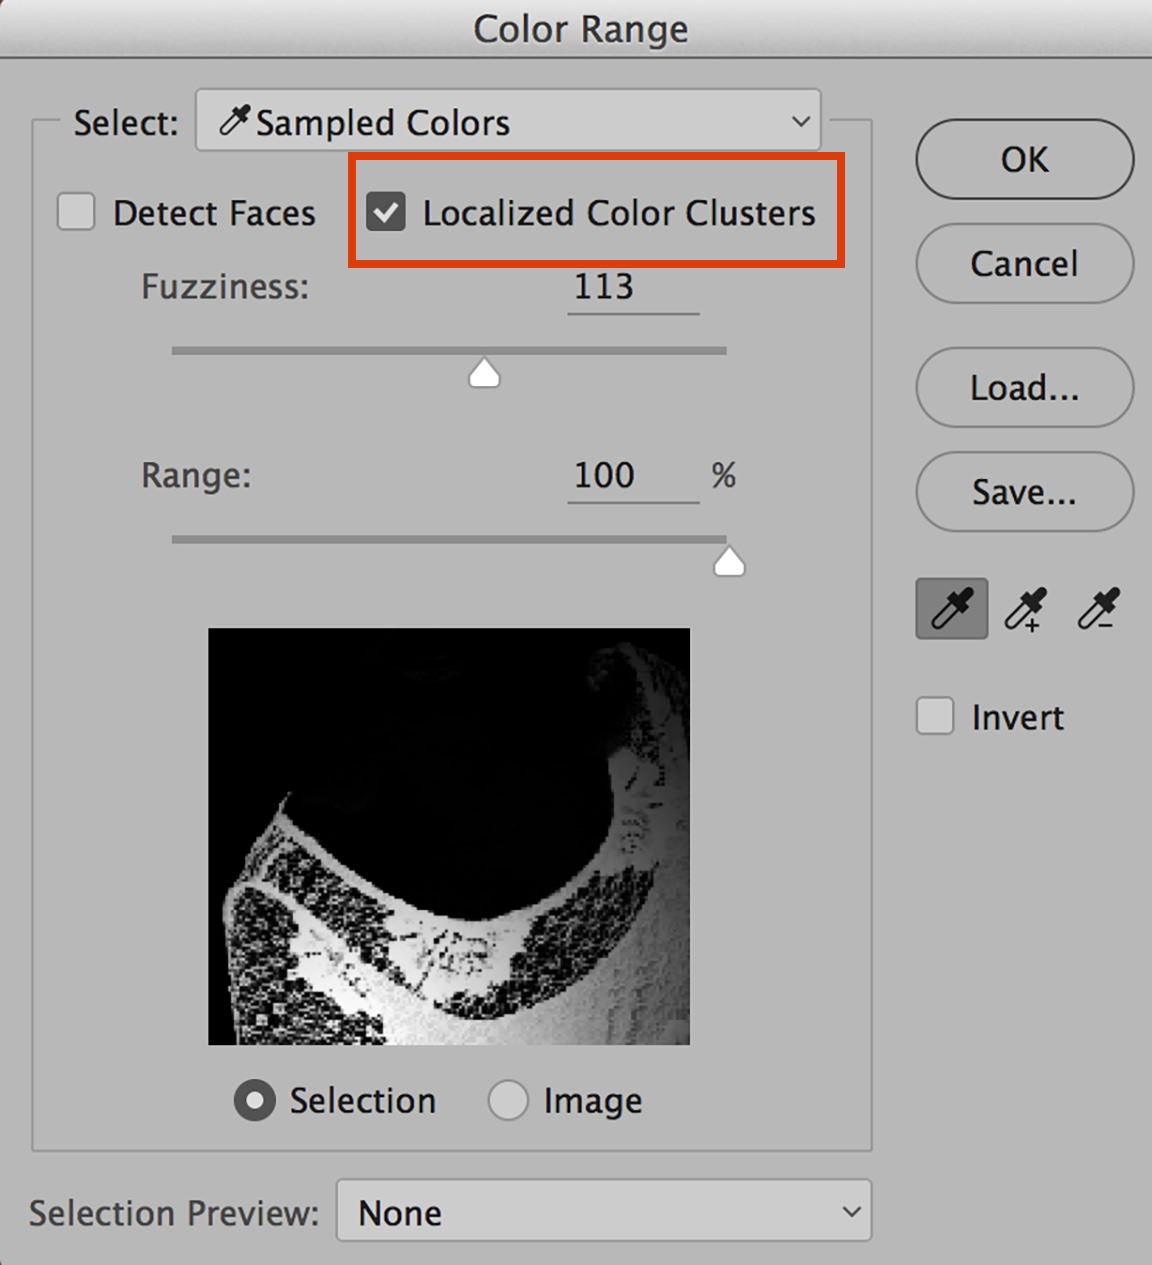 Localized Color Clusters option in the Color Range tool